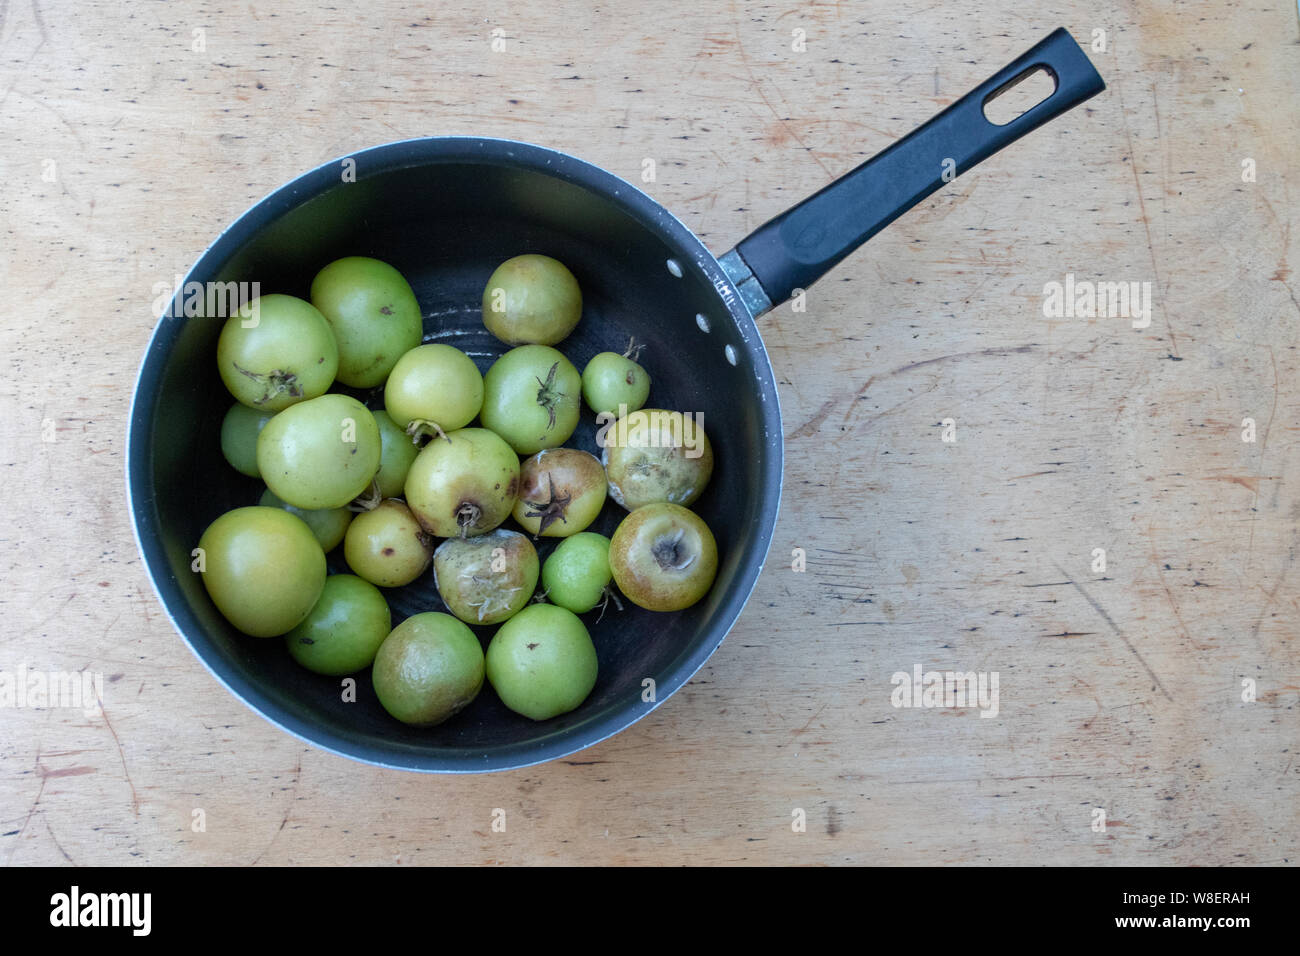 Green tomatoes some mouldy in a saucepan Stock Photo